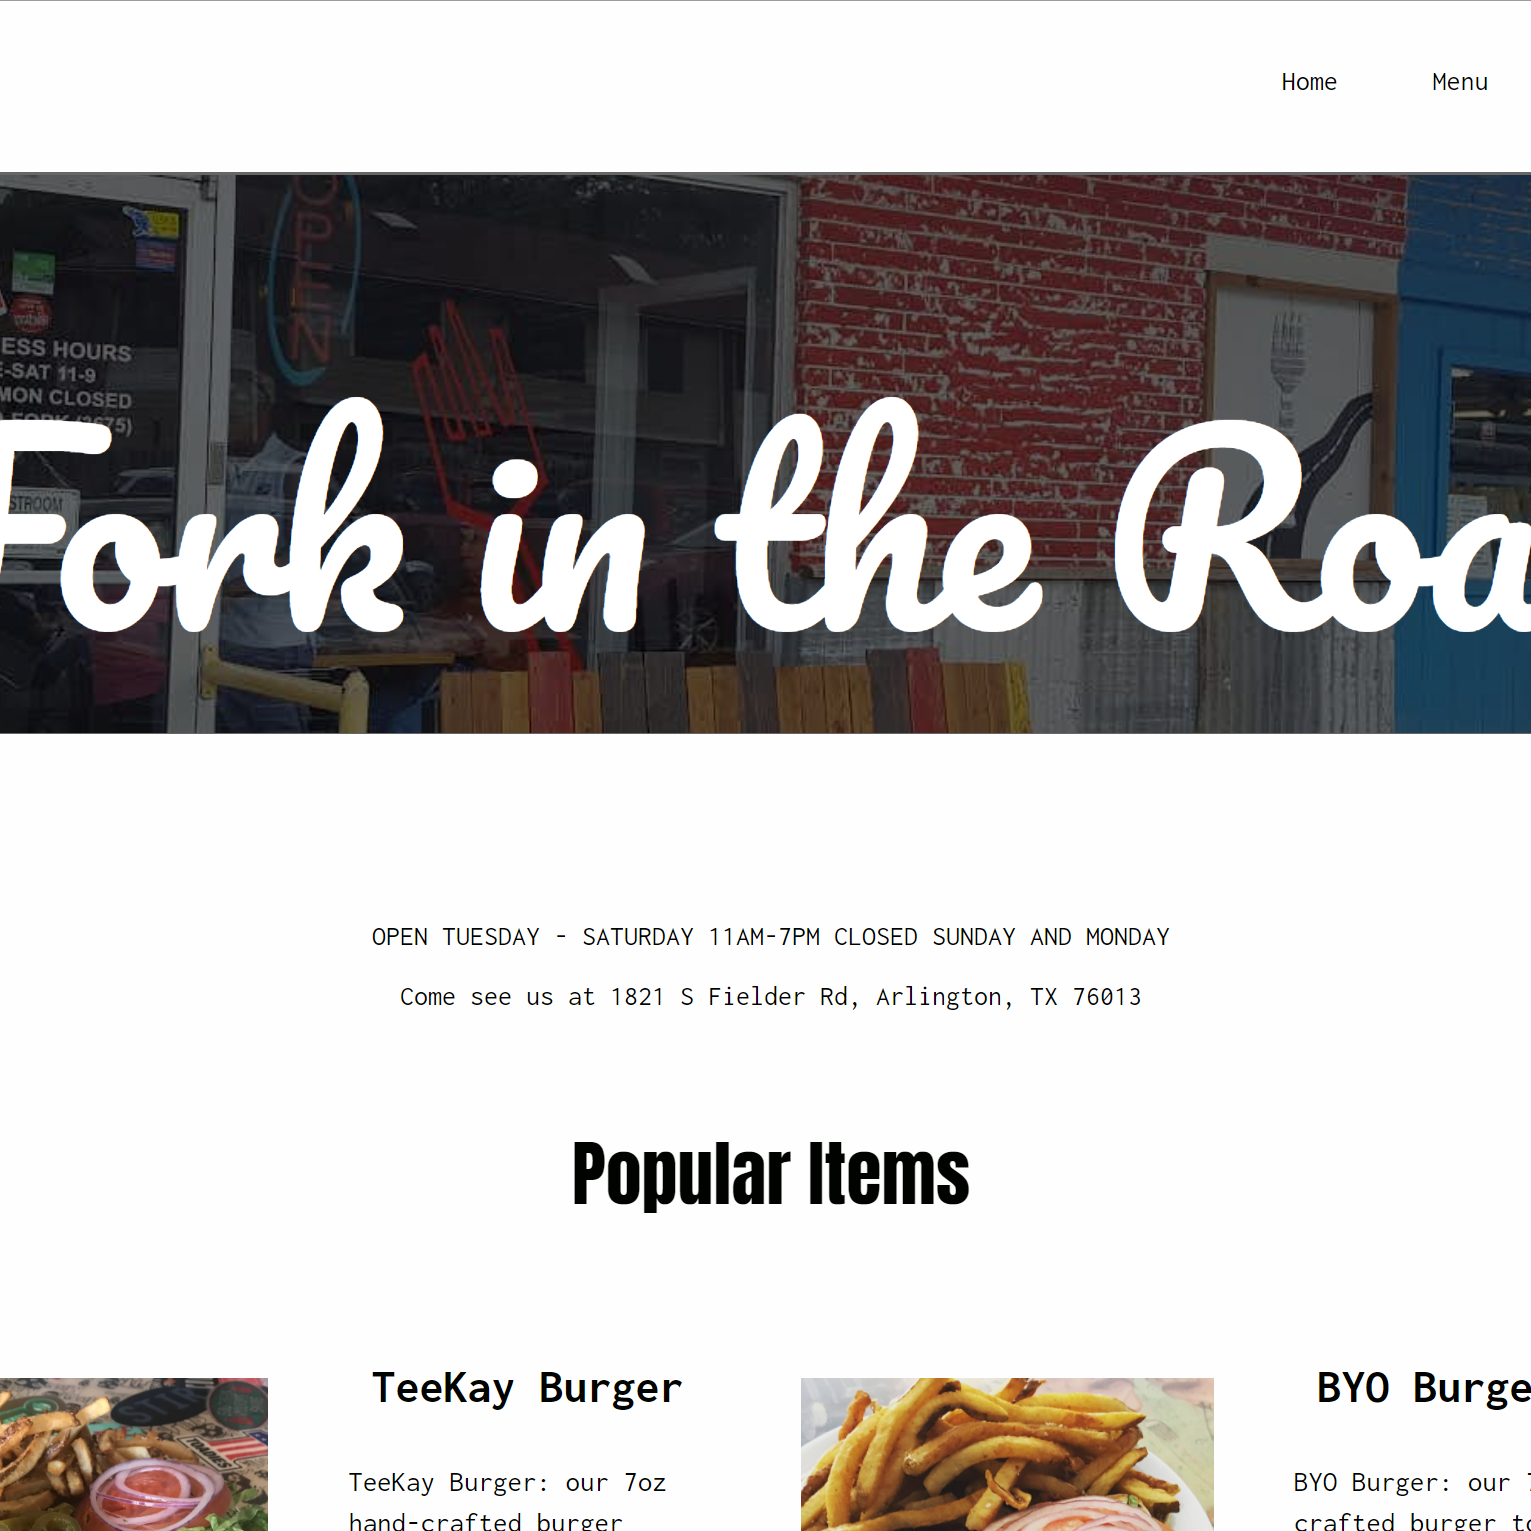 The new Fork in the Road website